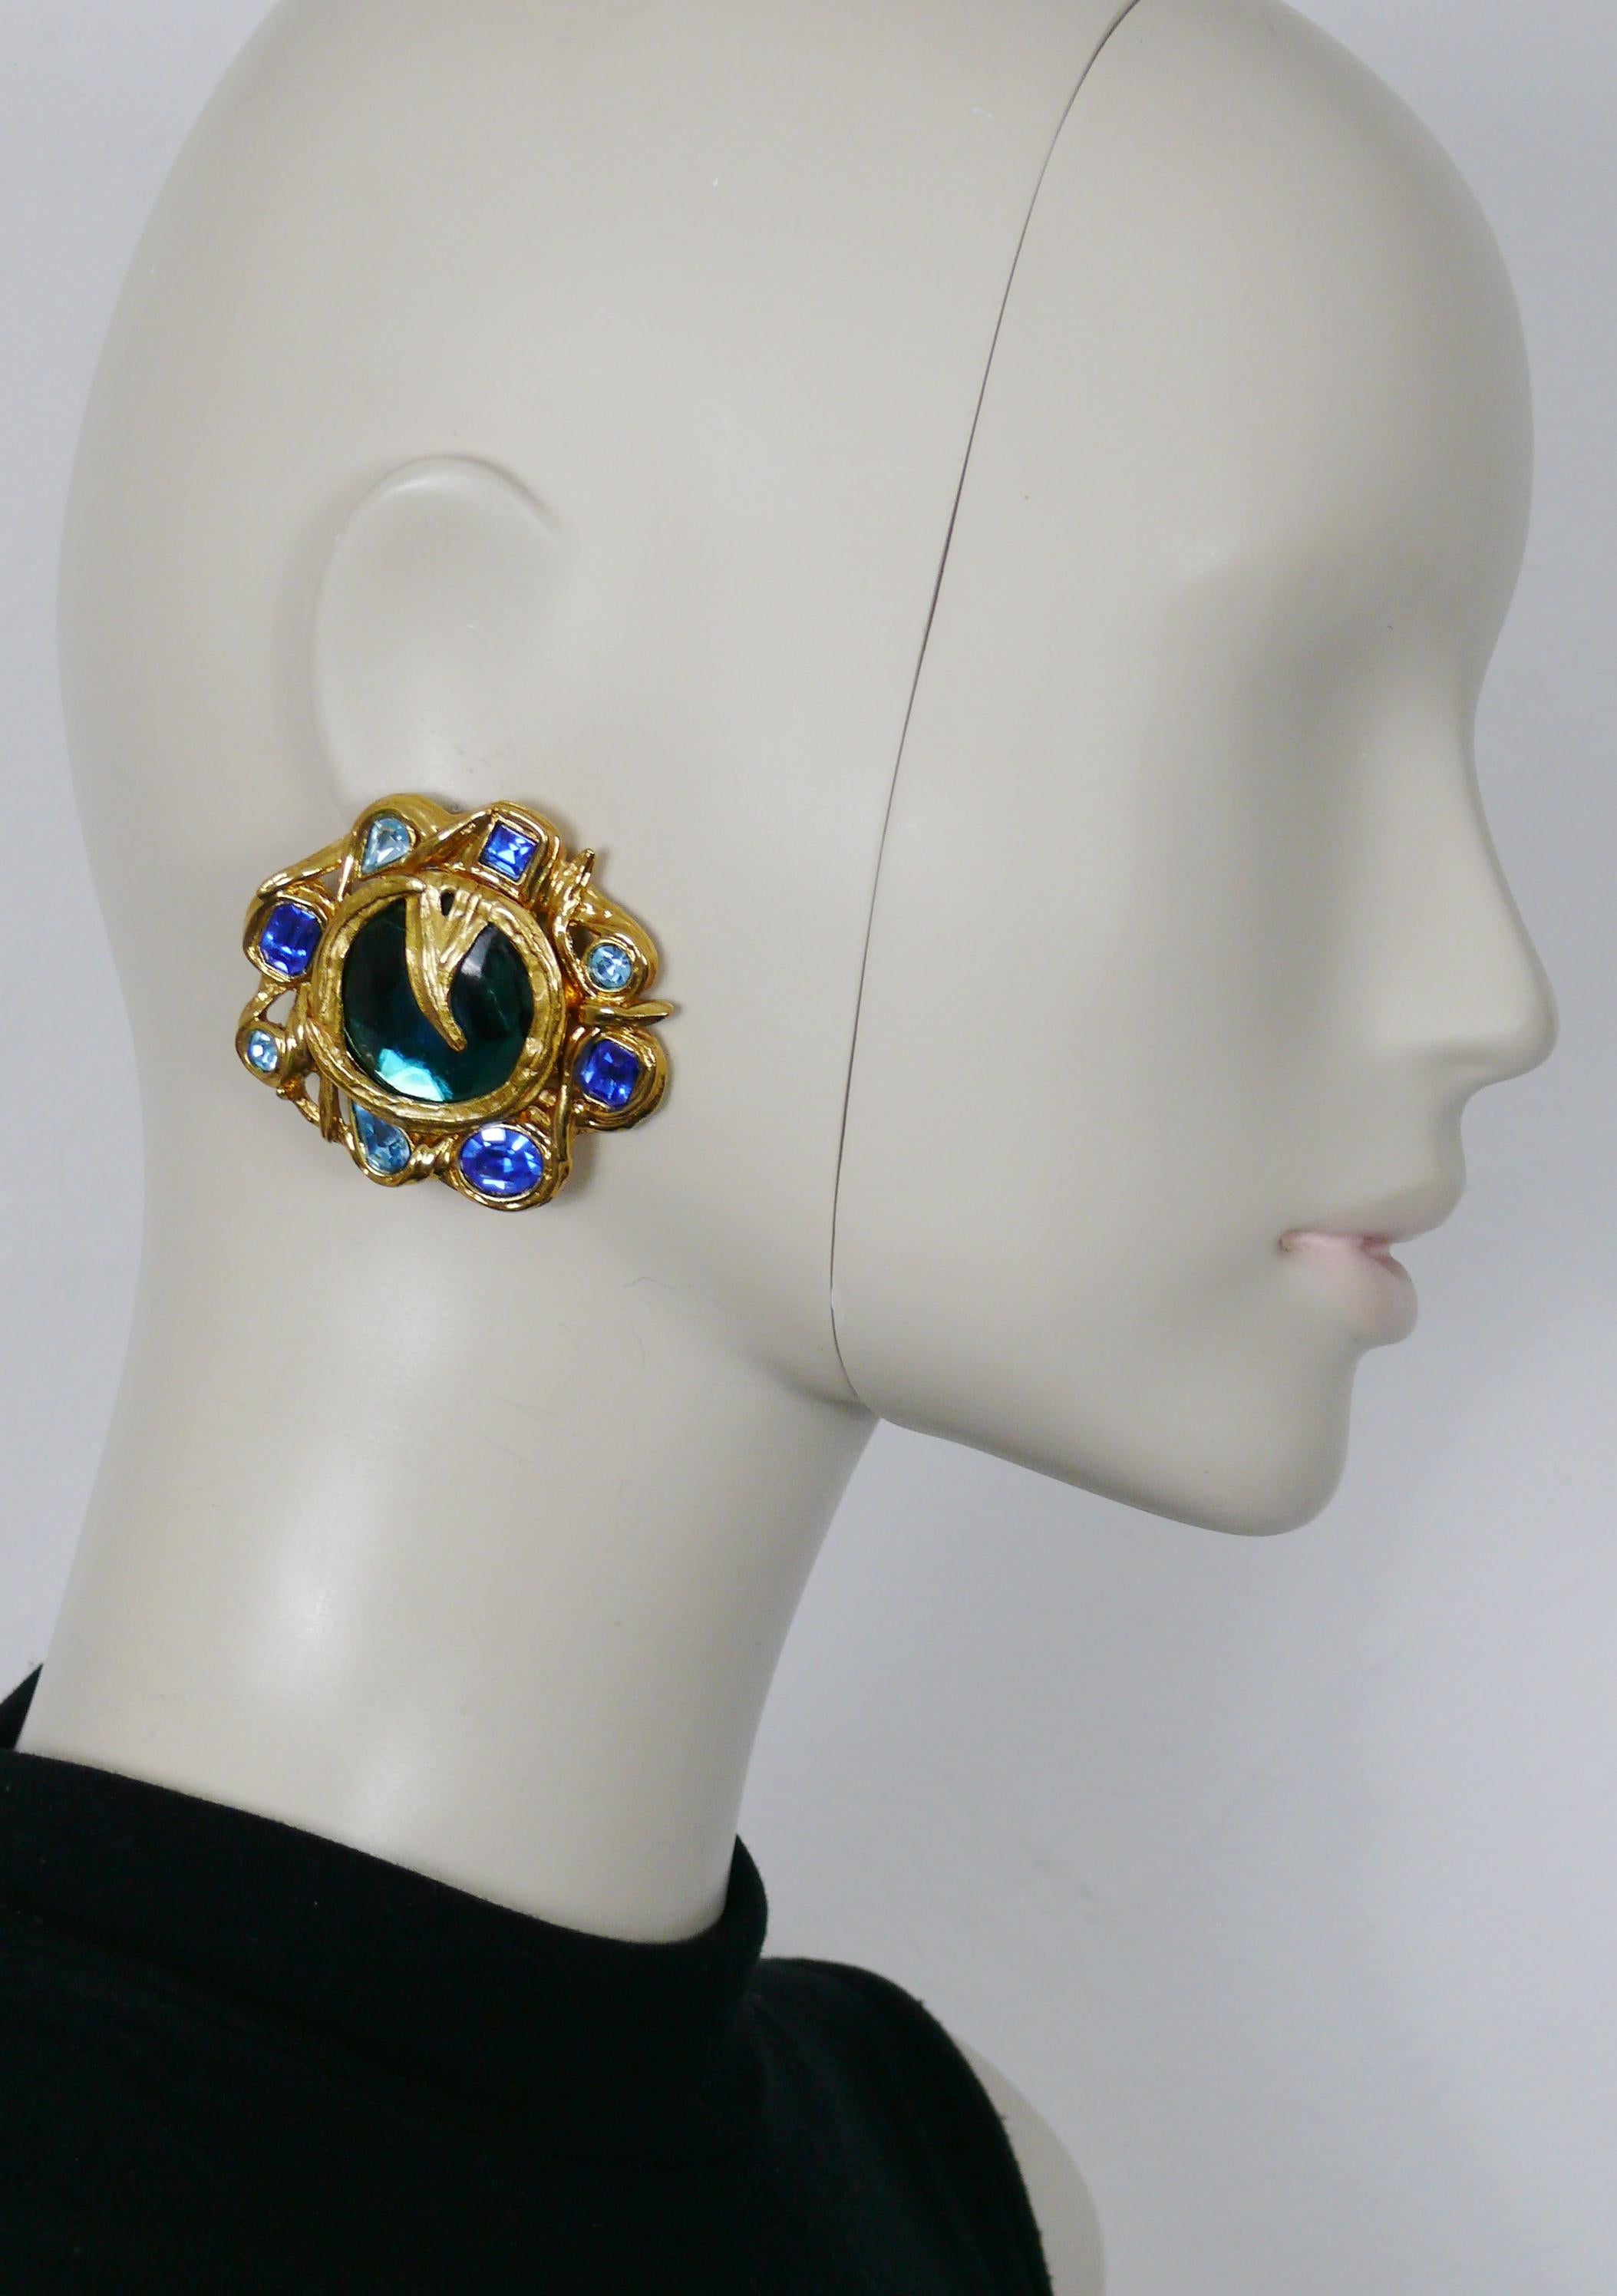 YVES SAINT LAURENT vintage massive CADIX gold toned clip-on earrings embellished with blue shade crystals and a blue resin cabochon.

Embossed YSL Made in France.

Indicative measurements : width approx. 5.2 cm (2.05 inches) / height approx. 5 cm